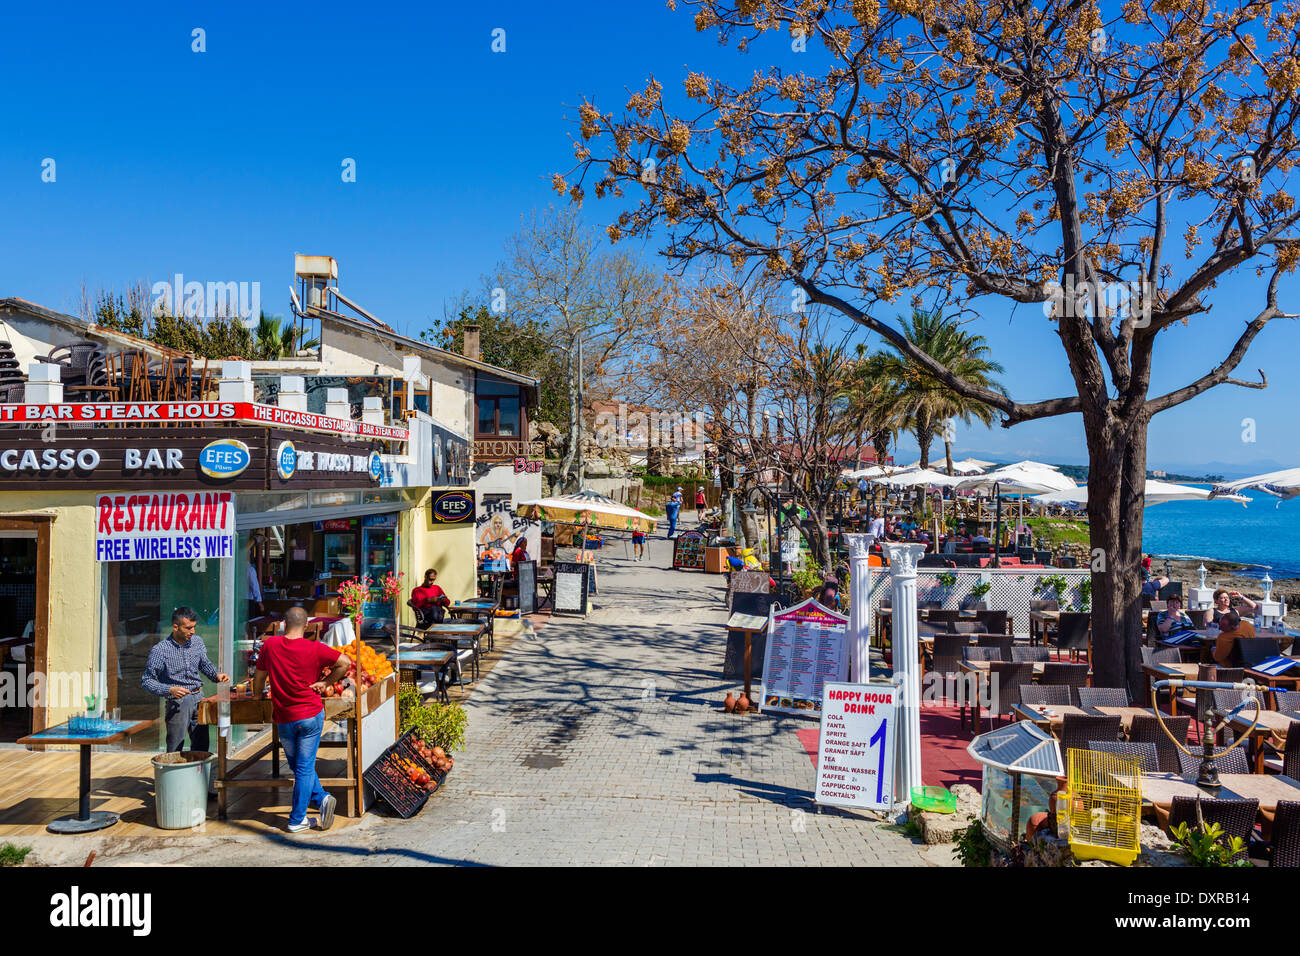 Waterfront restaurant in the old town, Side, Antalya Province, Turkey Stock Photo